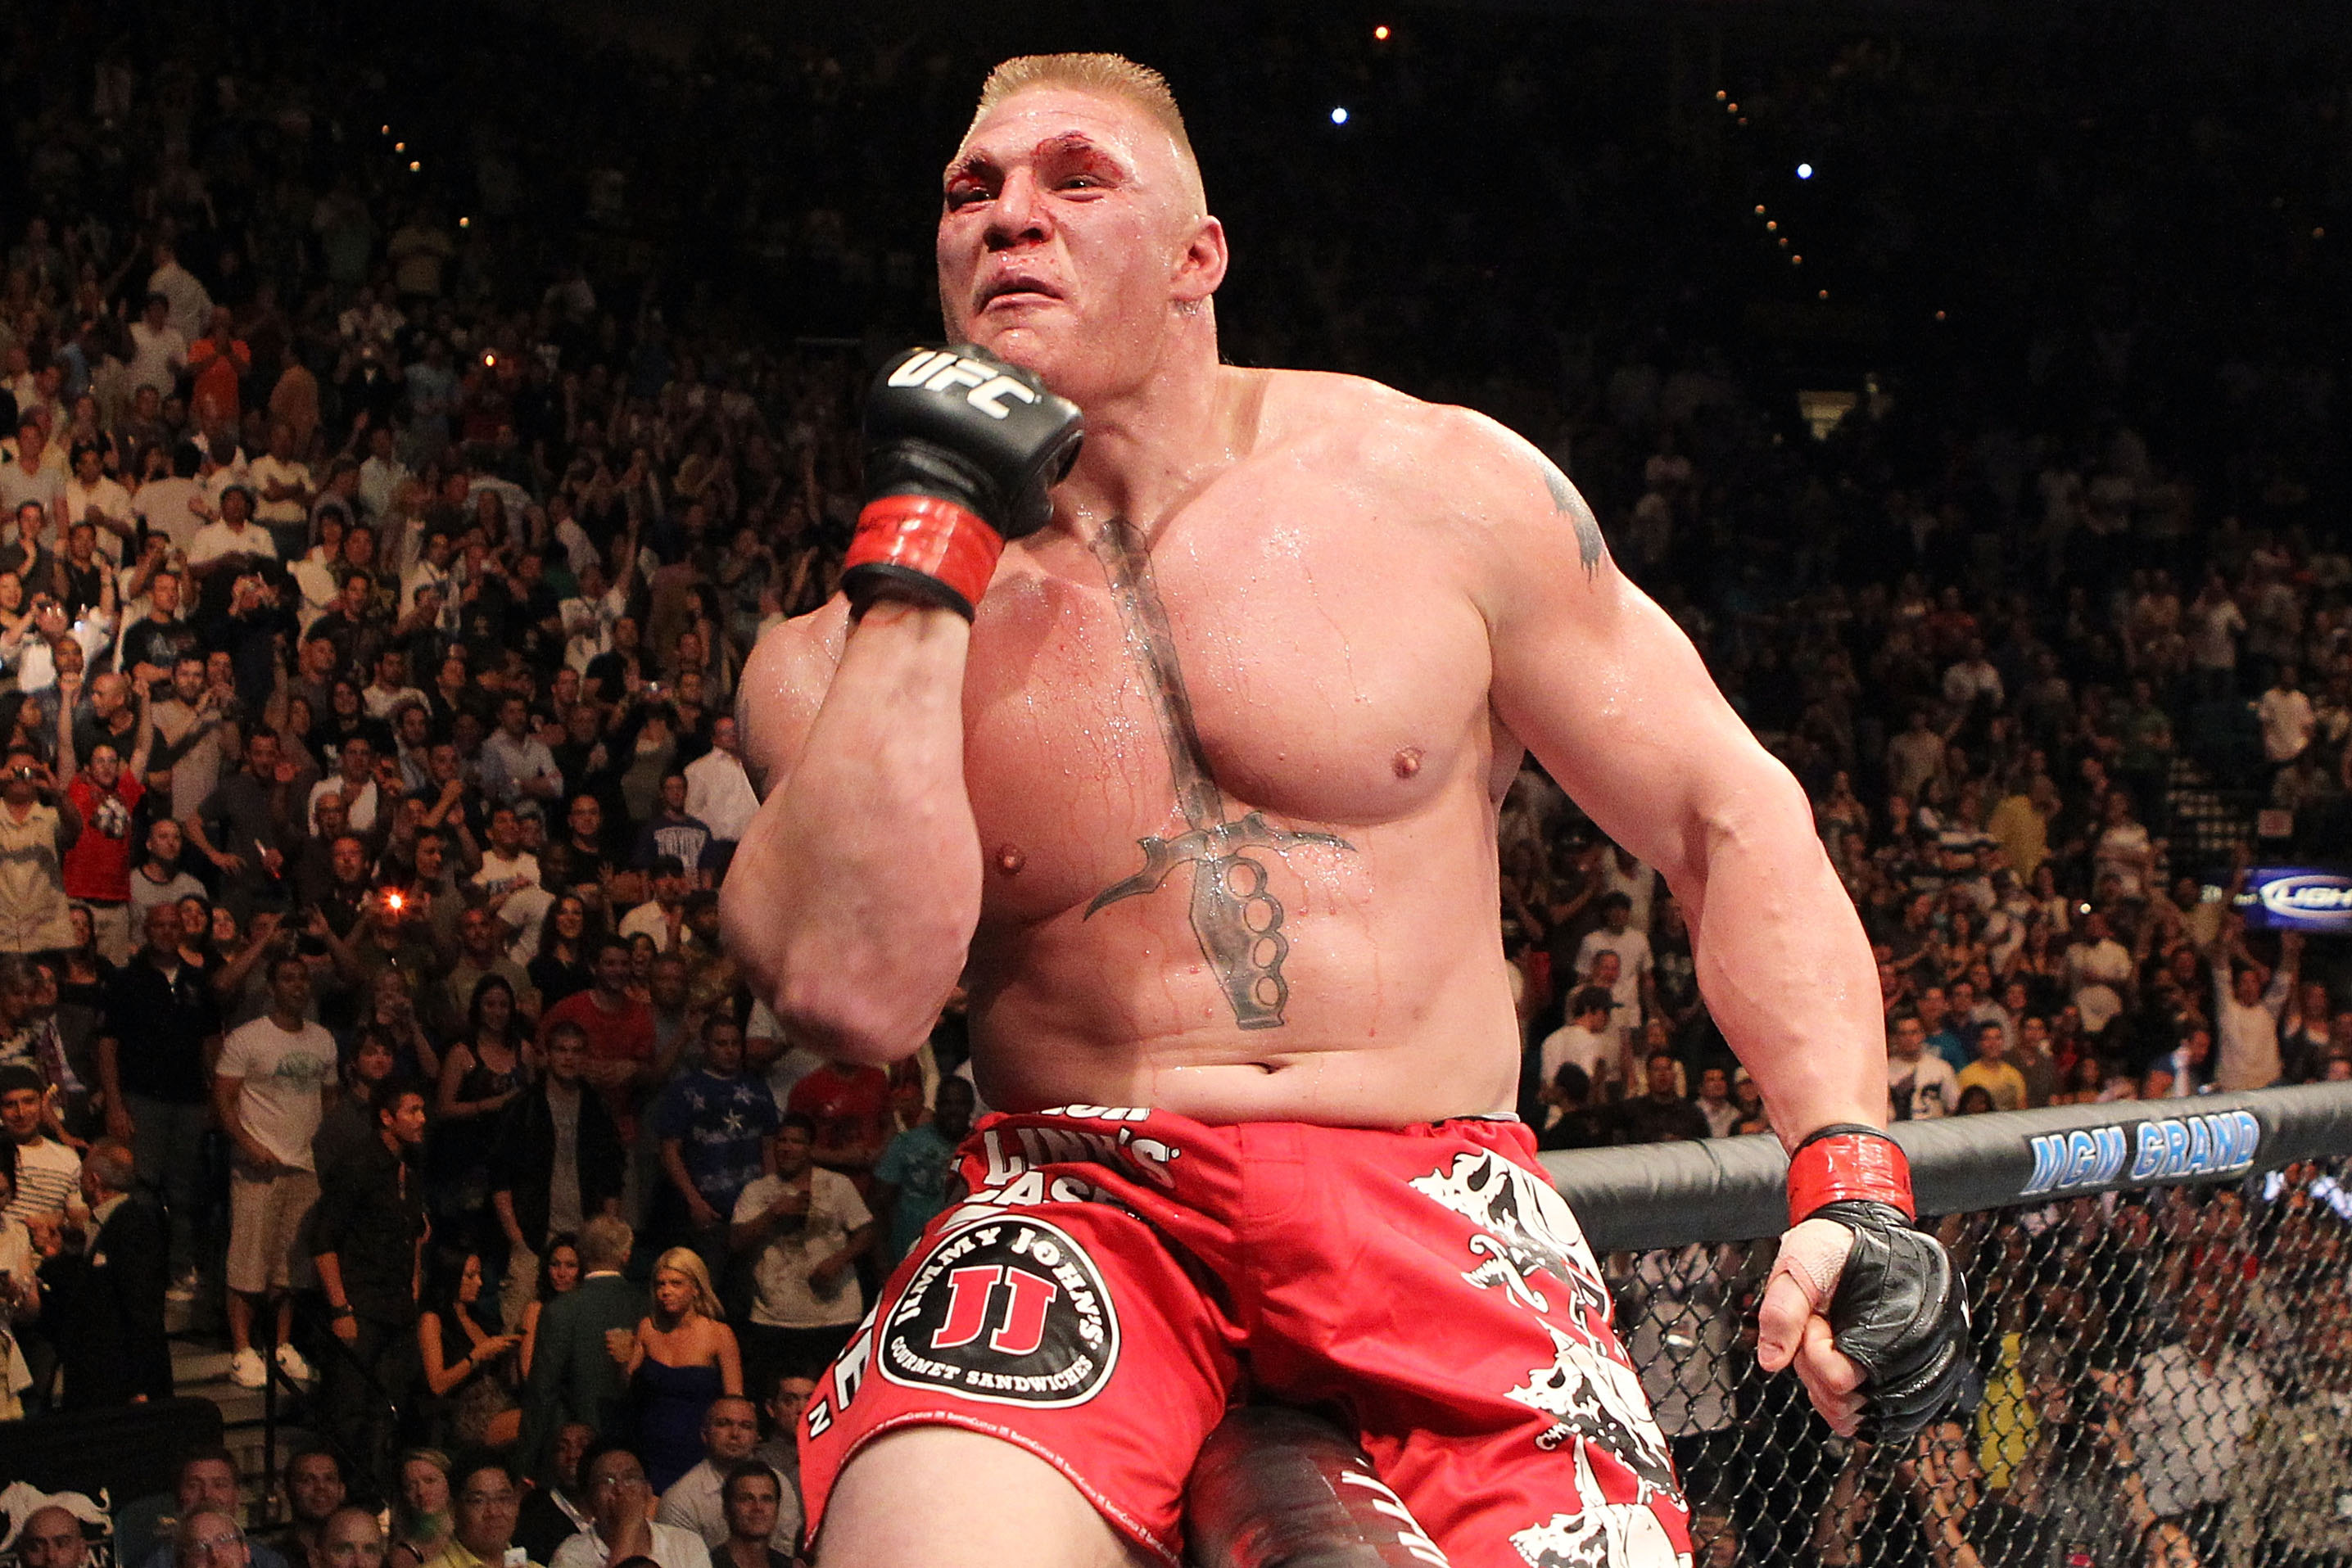 Brock Lesnar crossed over from the WWE to UFC